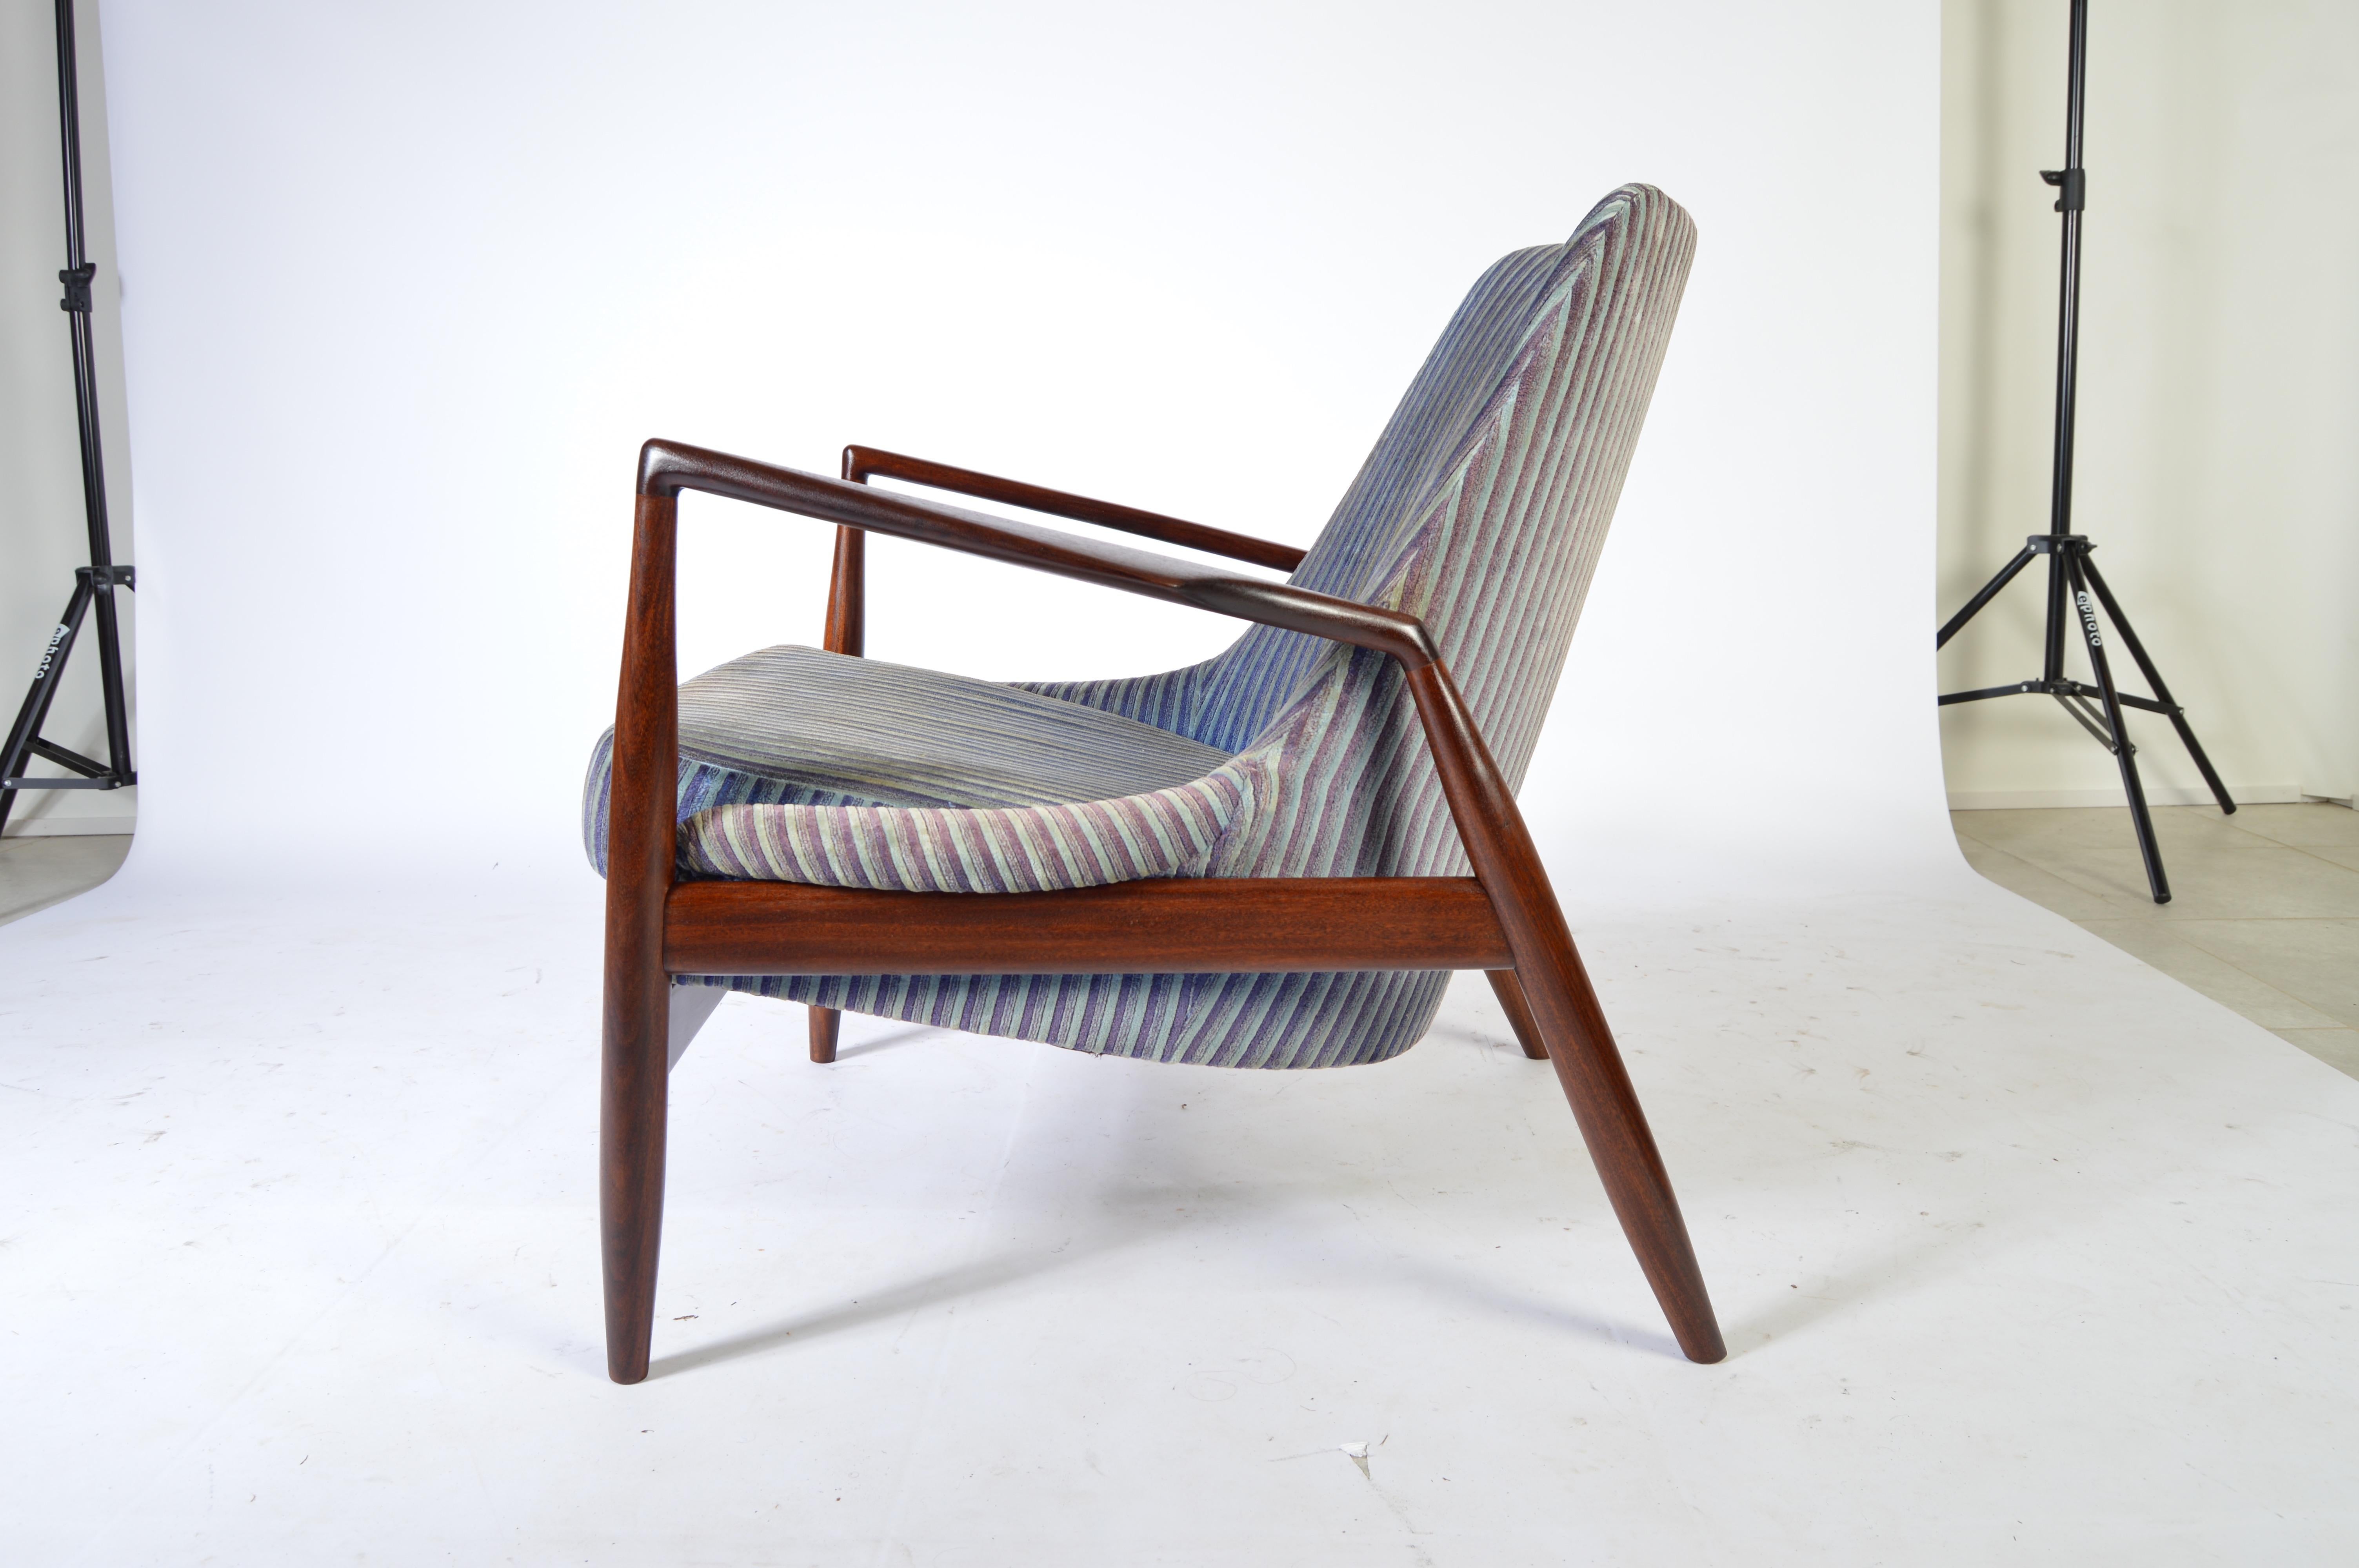 IB Kofod Larsen 'Seal' chair model 503-799, circa 1957 having original upholstery with teak frame.
The frame is in outstanding condition having been well maintained. The original upholstery shows typical signs of age and use.
One of Kofod-larsen's